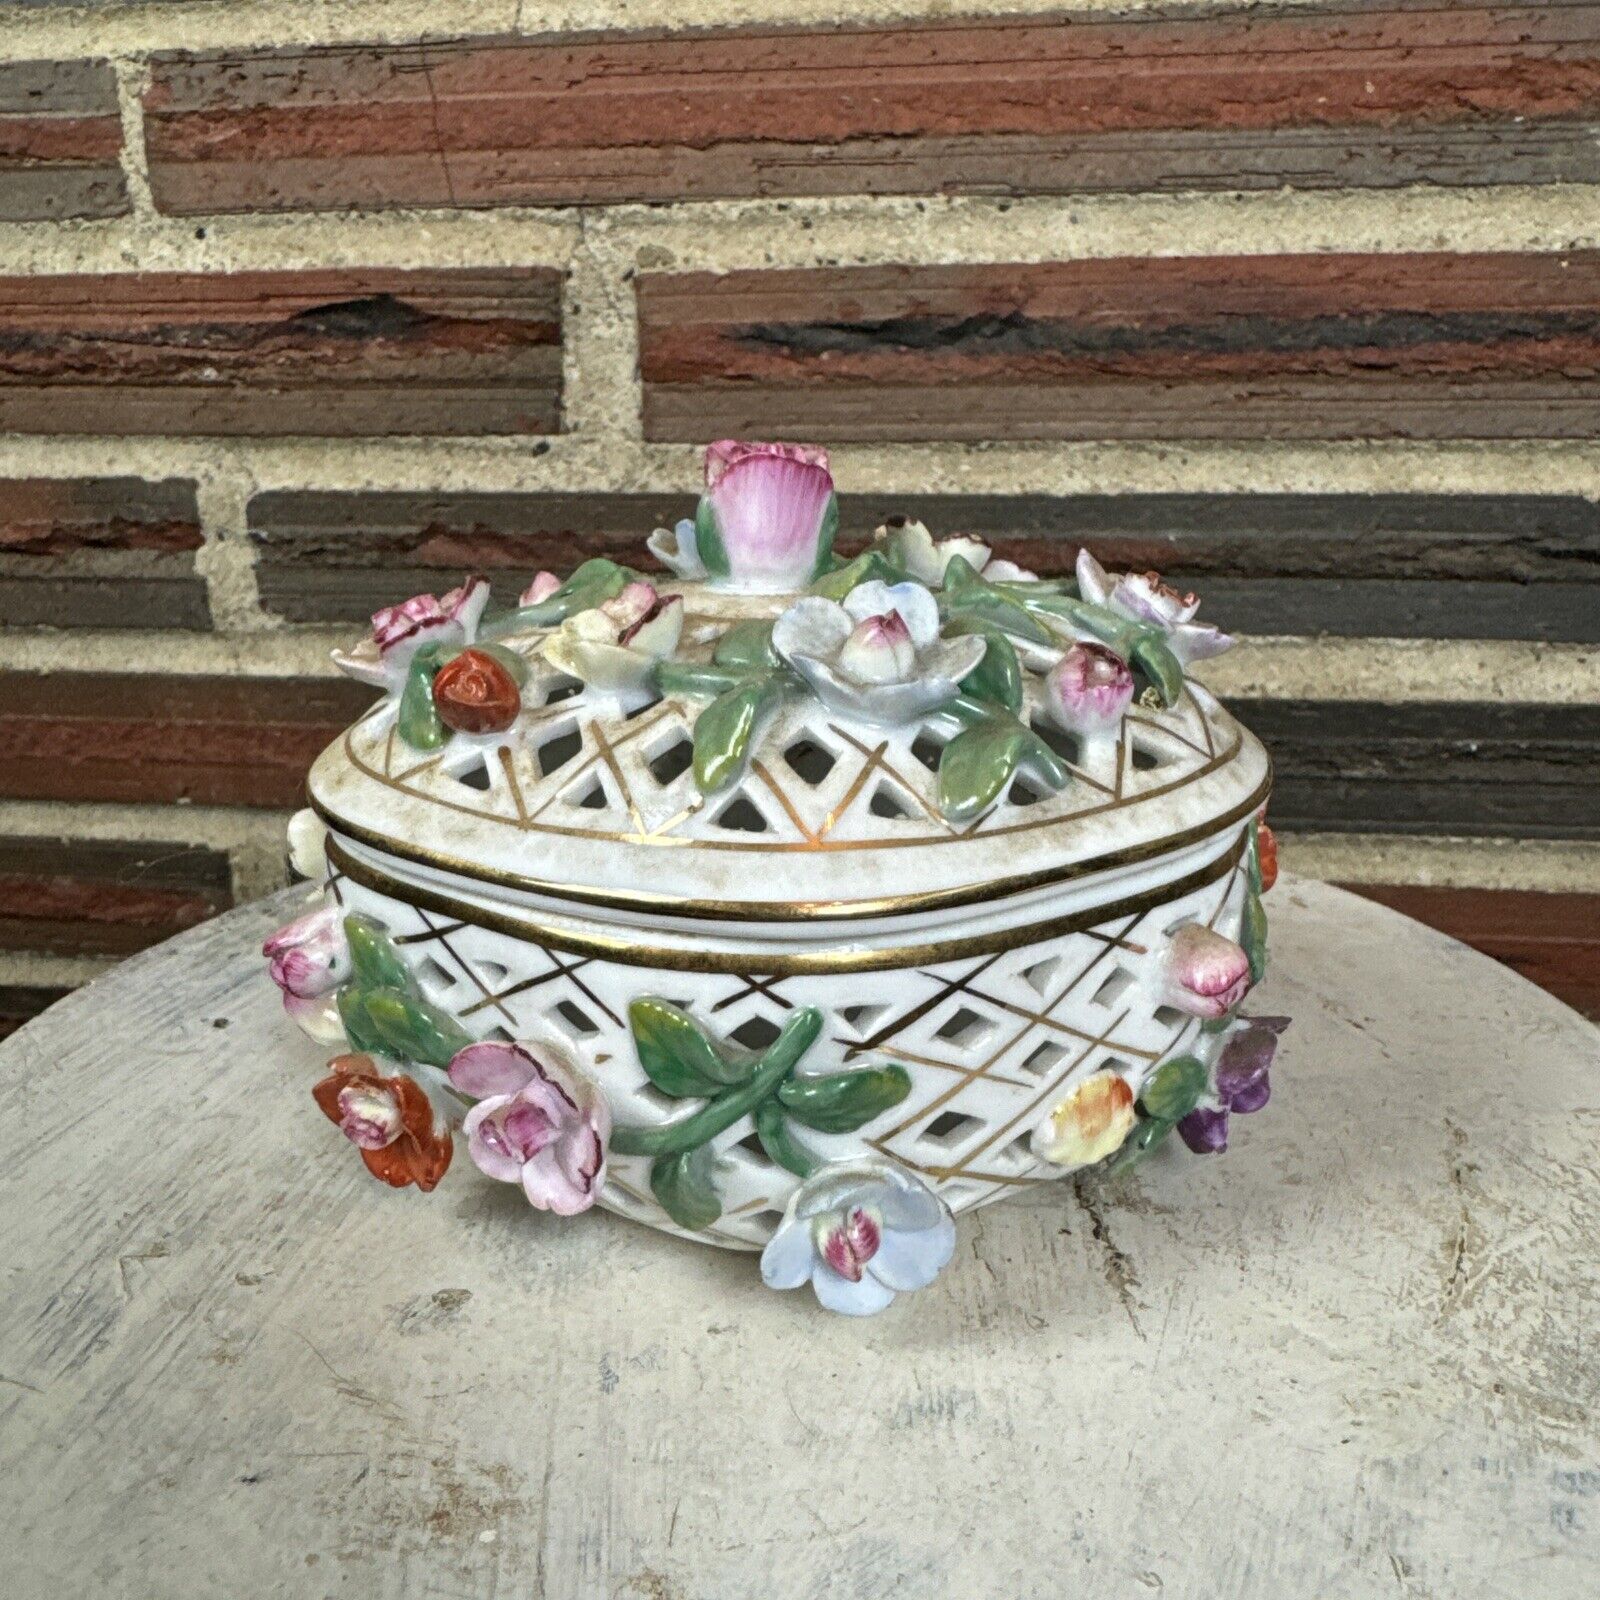 Vintage Porcelain Trinket Box With Lid Raised Flowers Colorful Made In China